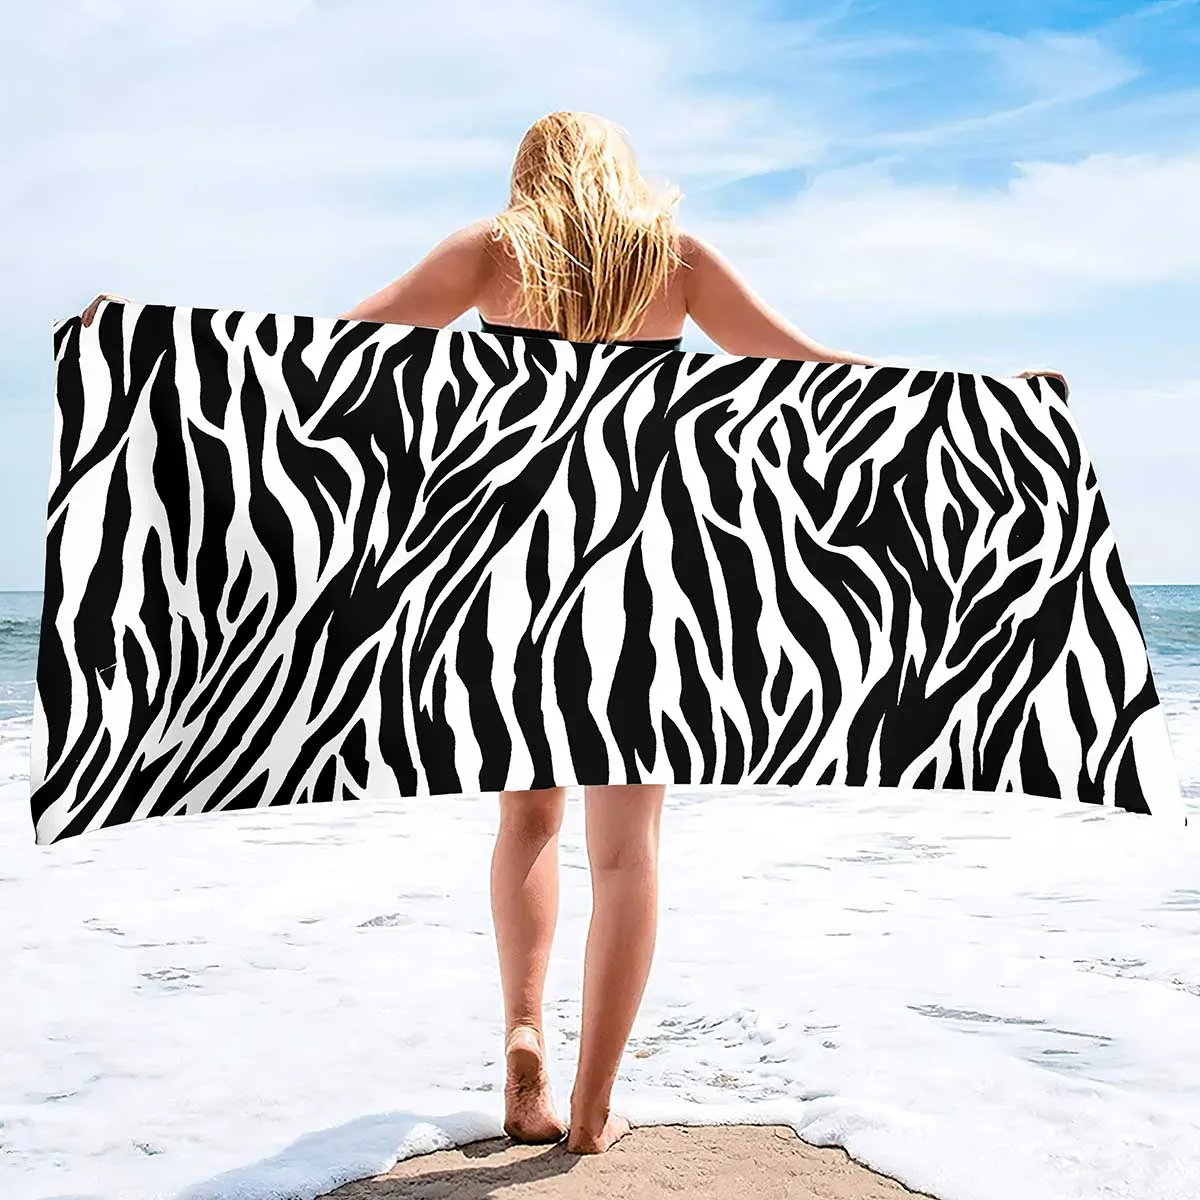 

Soft Beach Towel Abstract Animal Zebra Print,Sand Free Beach Towel Thin Quick Fast Dry Absorbent Oversized Lightweight Towels